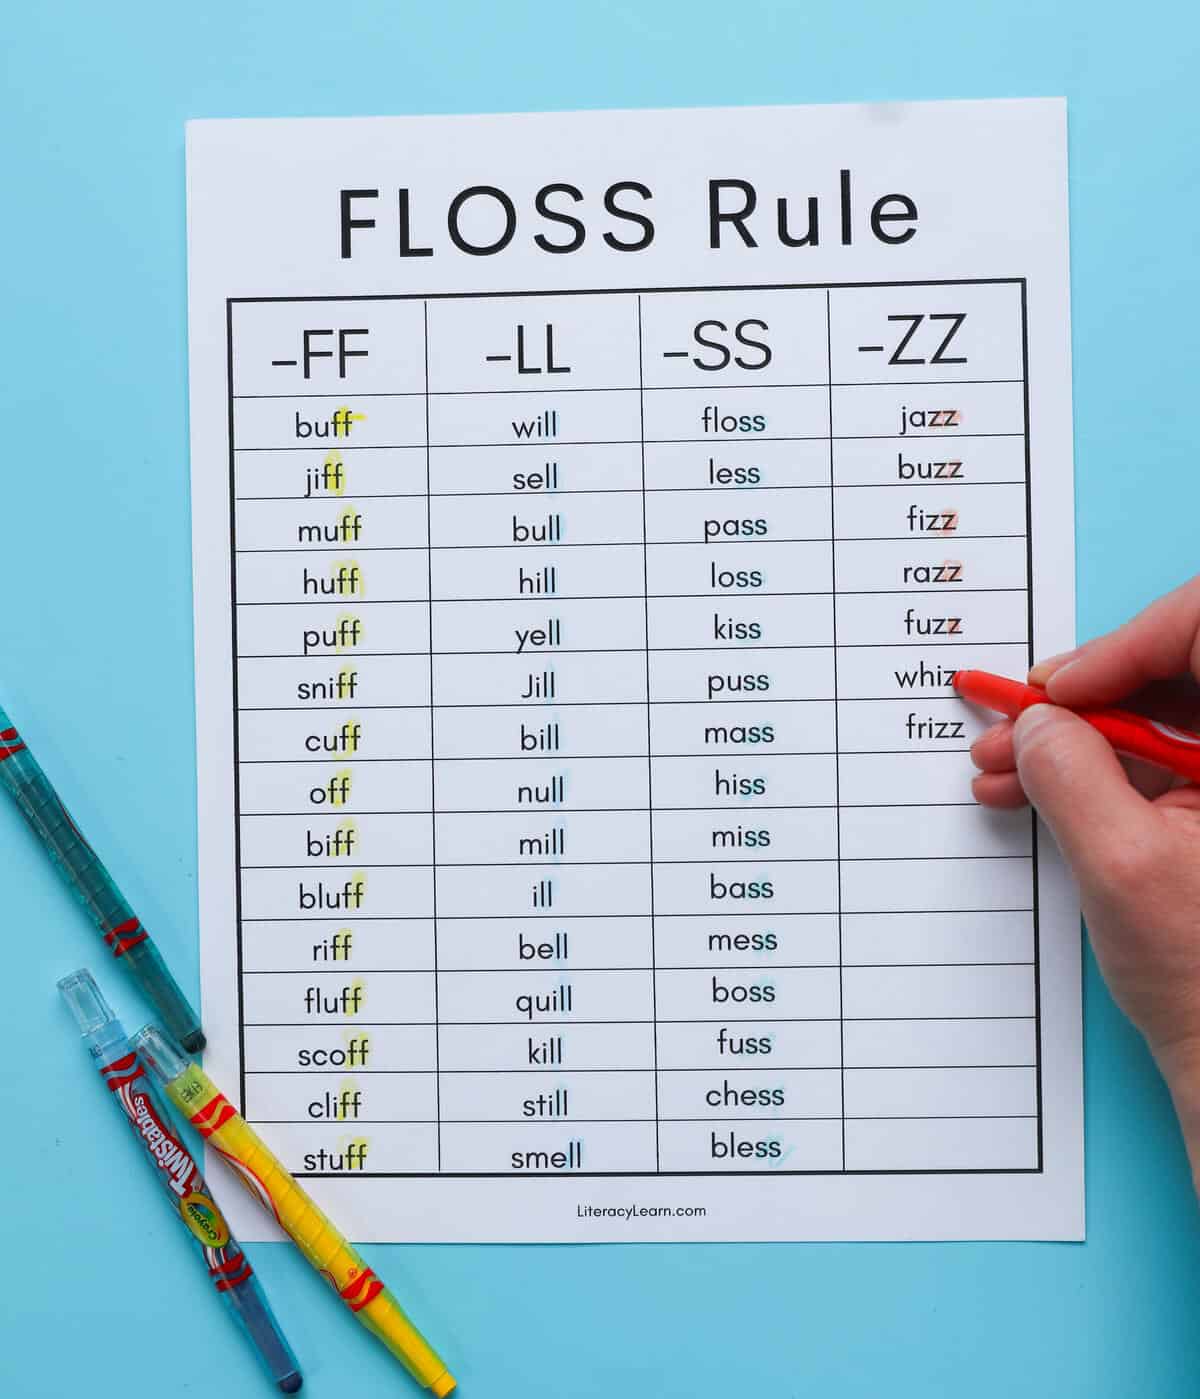 A student highlighting the floss letters on a printed list of FLOSS words.